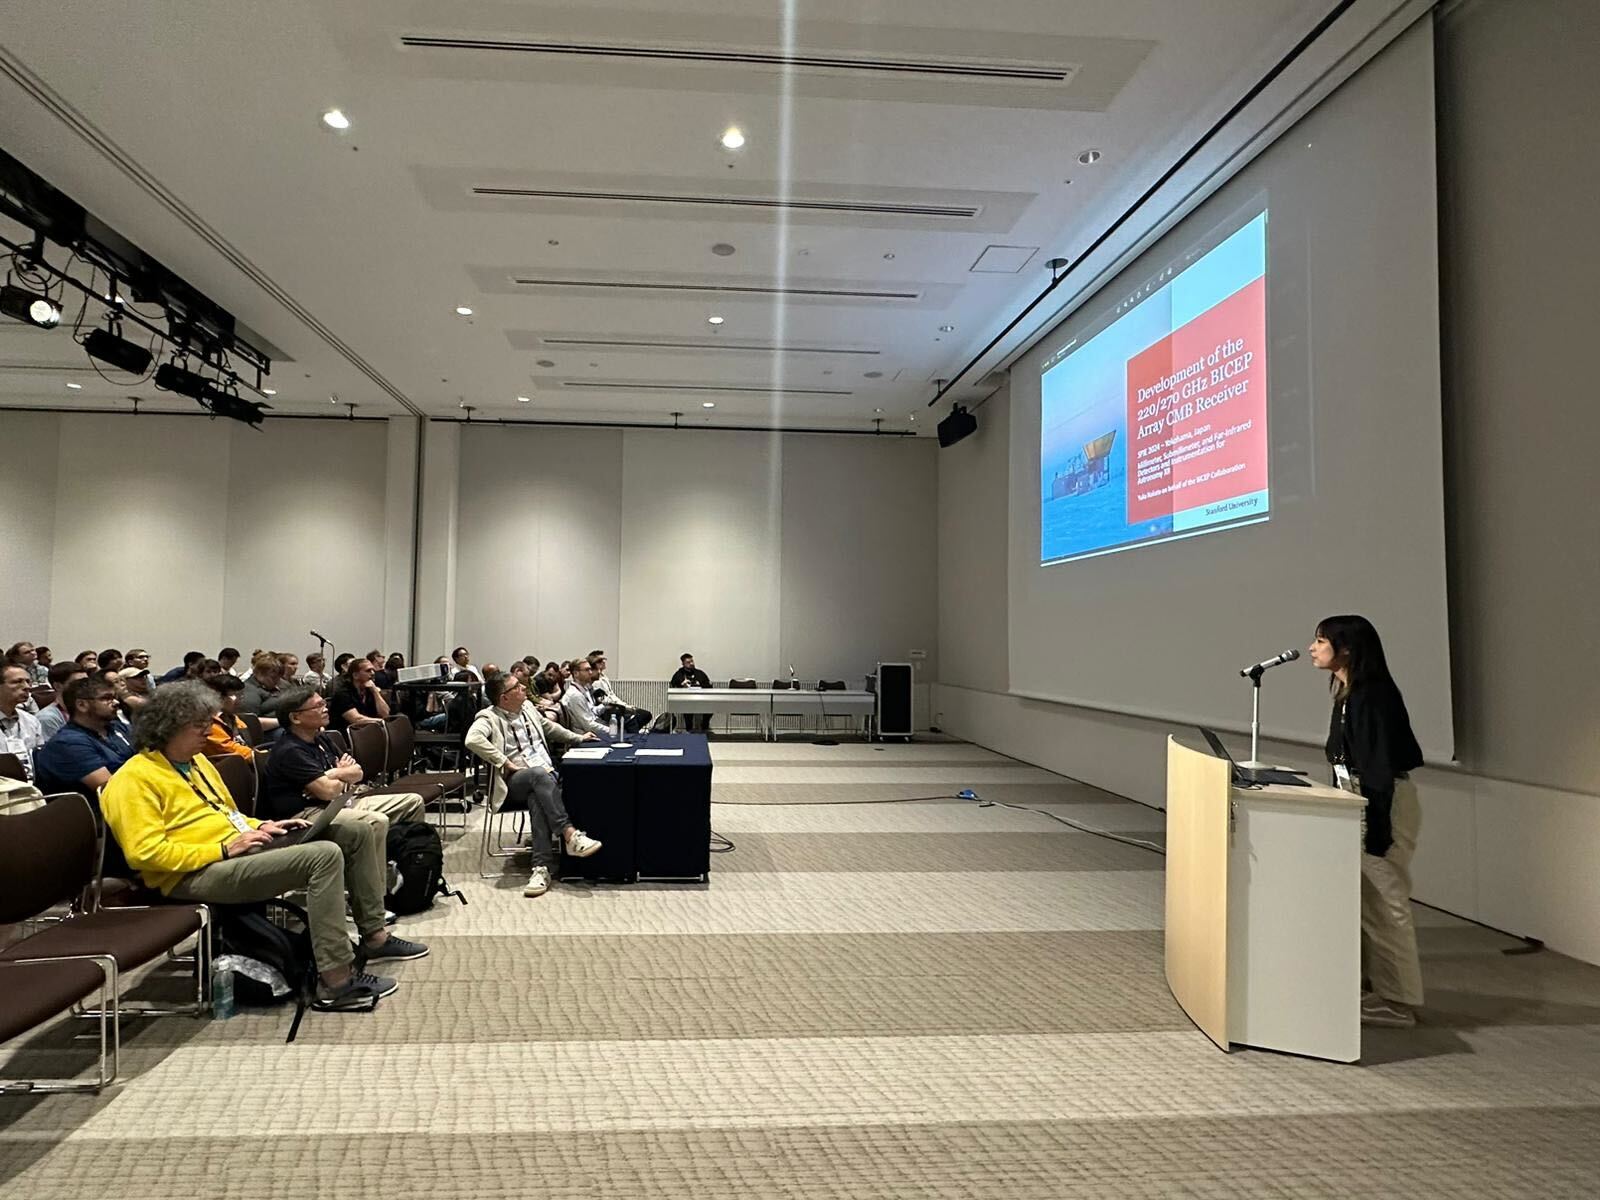 Yuka Nakato presenting their research to a large group of people at SPIE